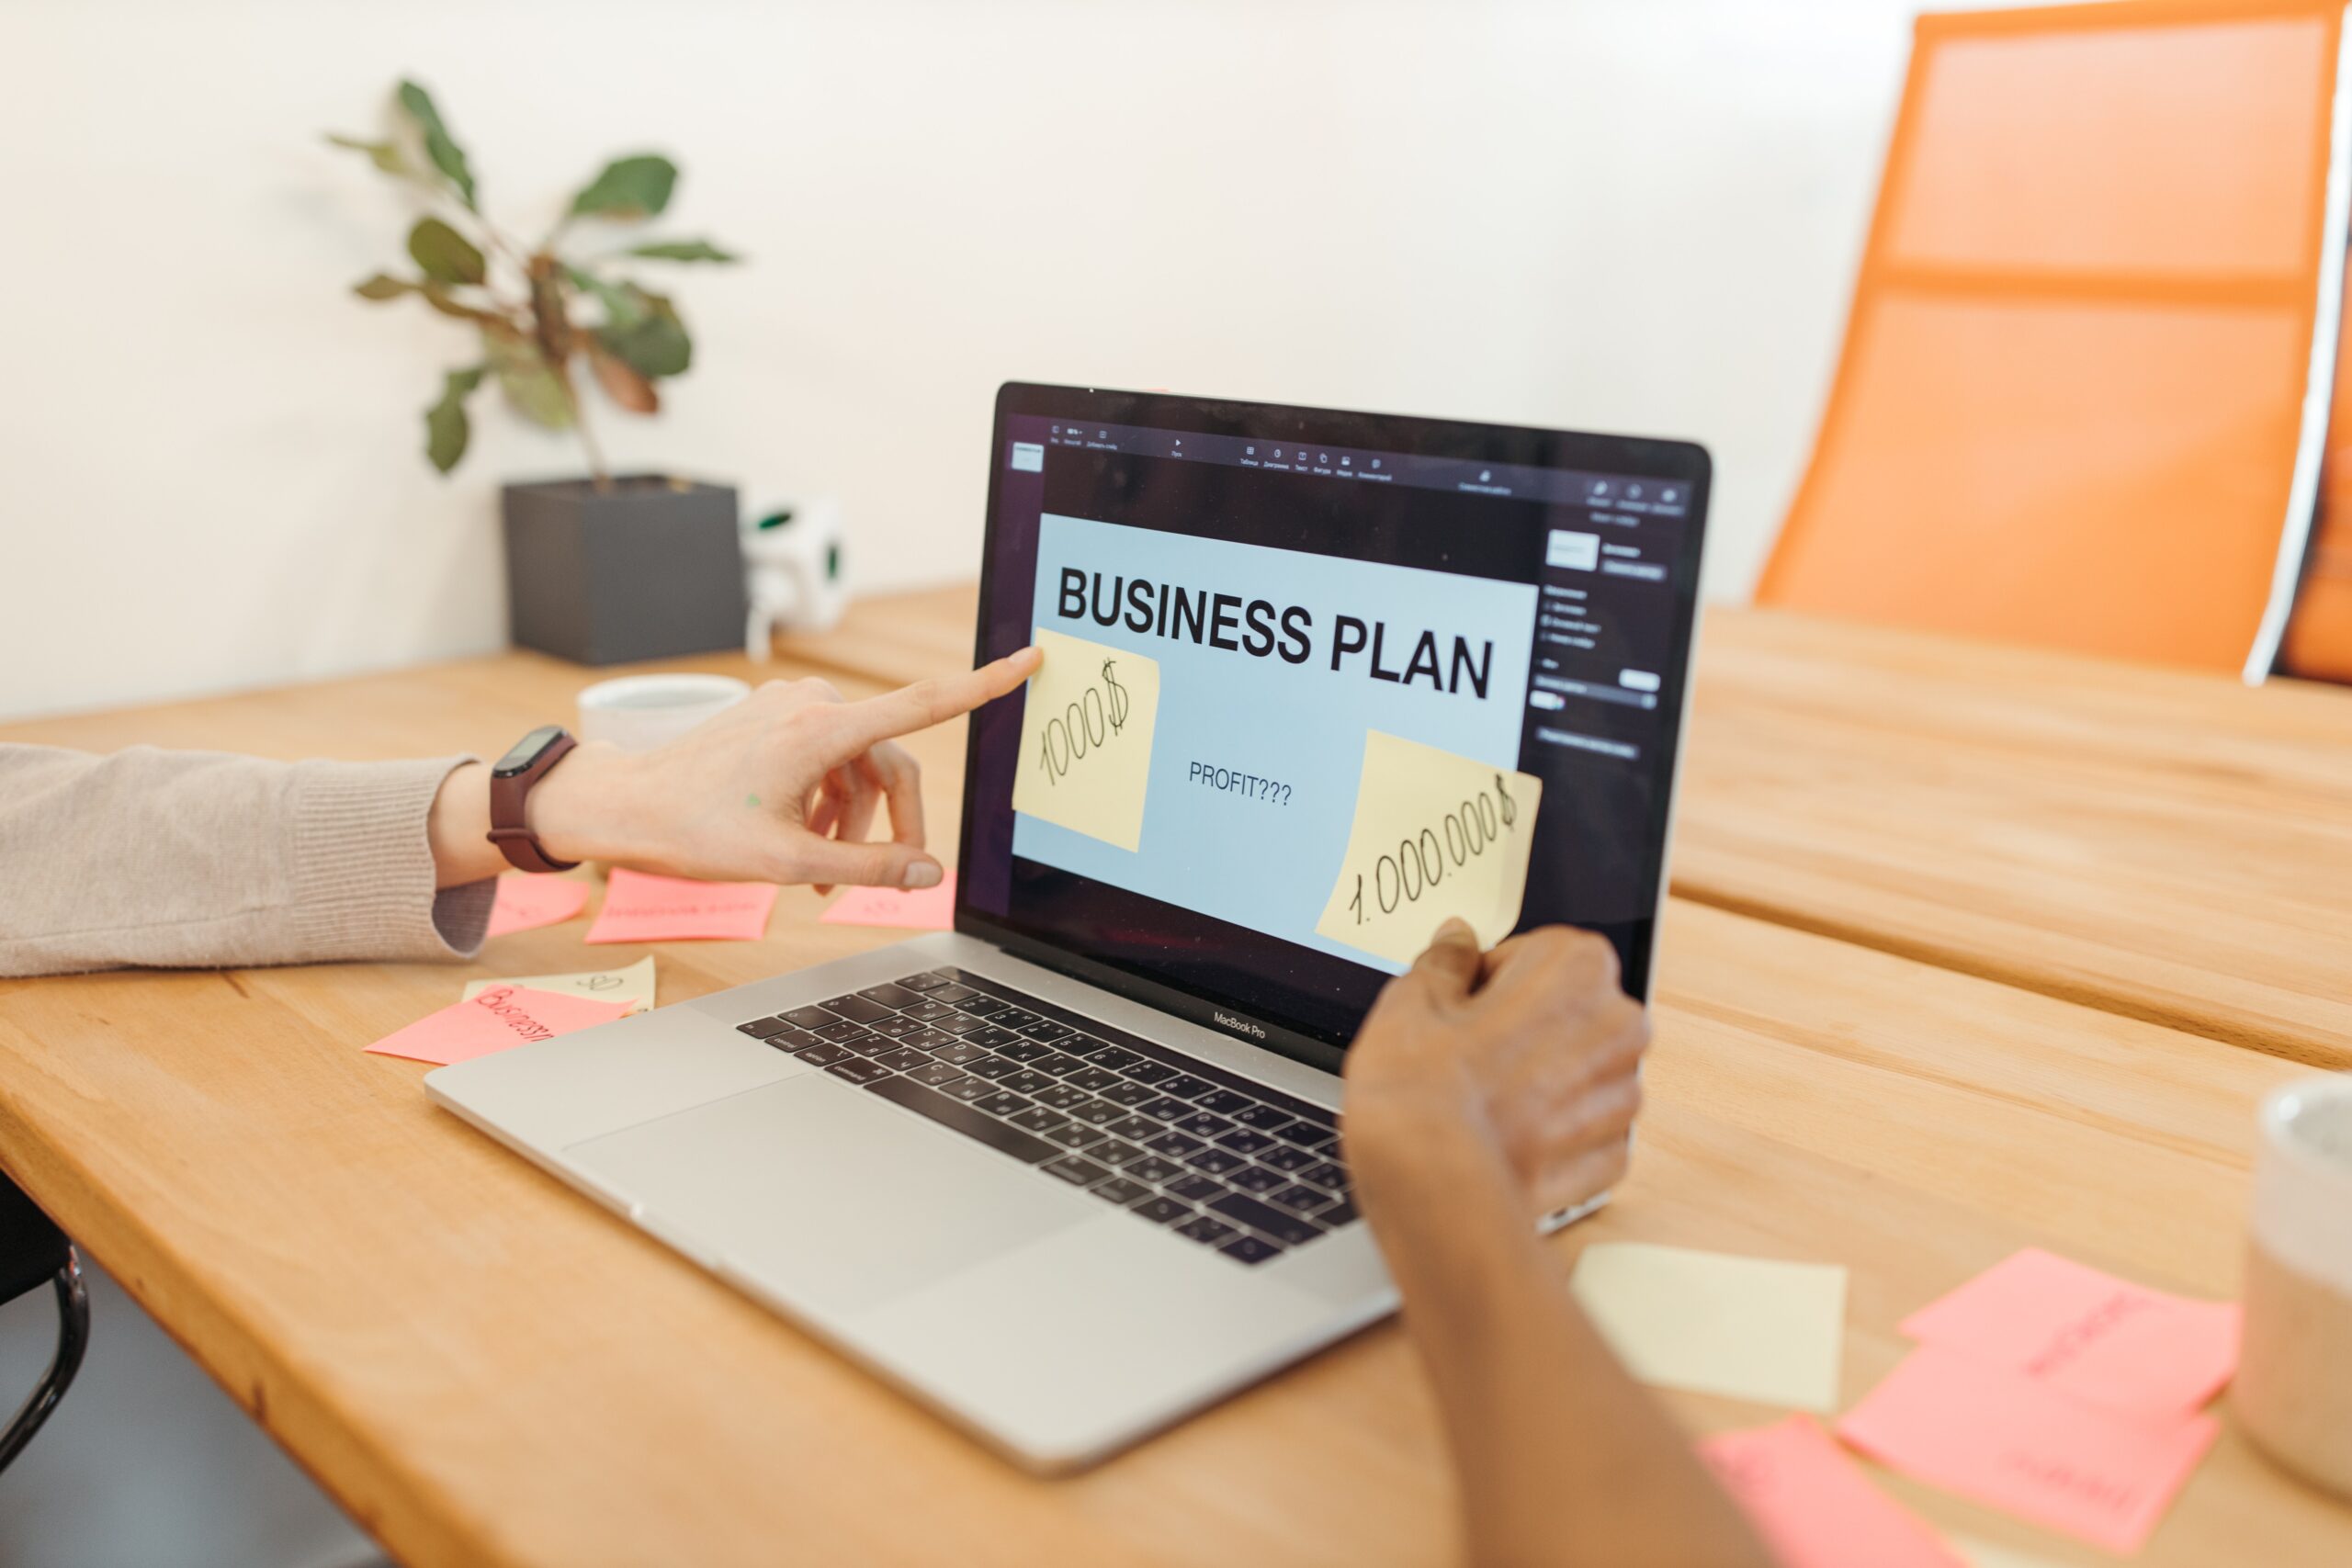 What is business plan?